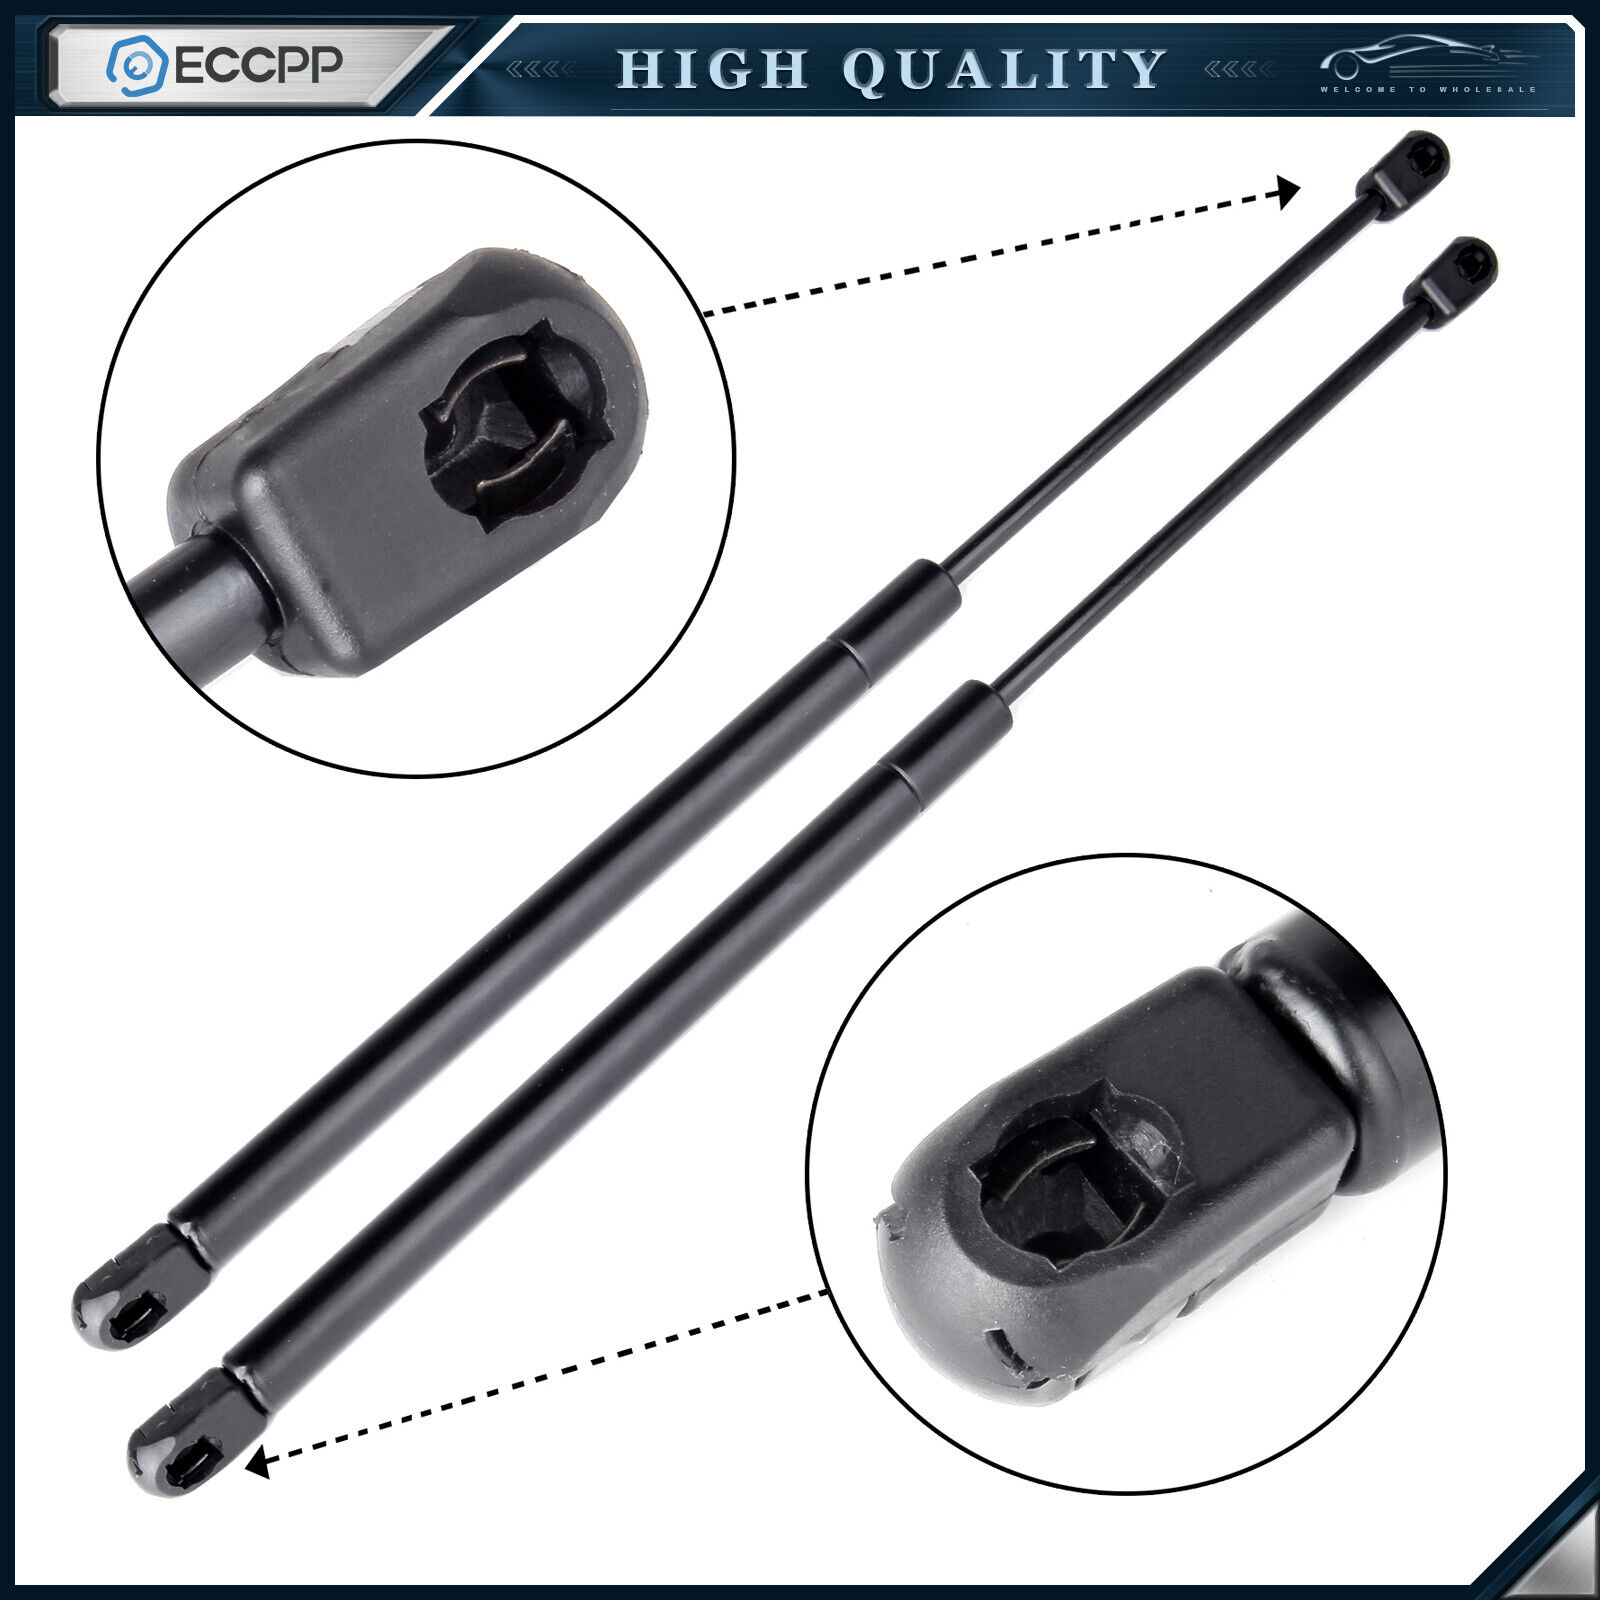 ECCPP Qty 2 Trunk Gas Charged Lift Supports Struts For 2000-2007 Panoz Esperante